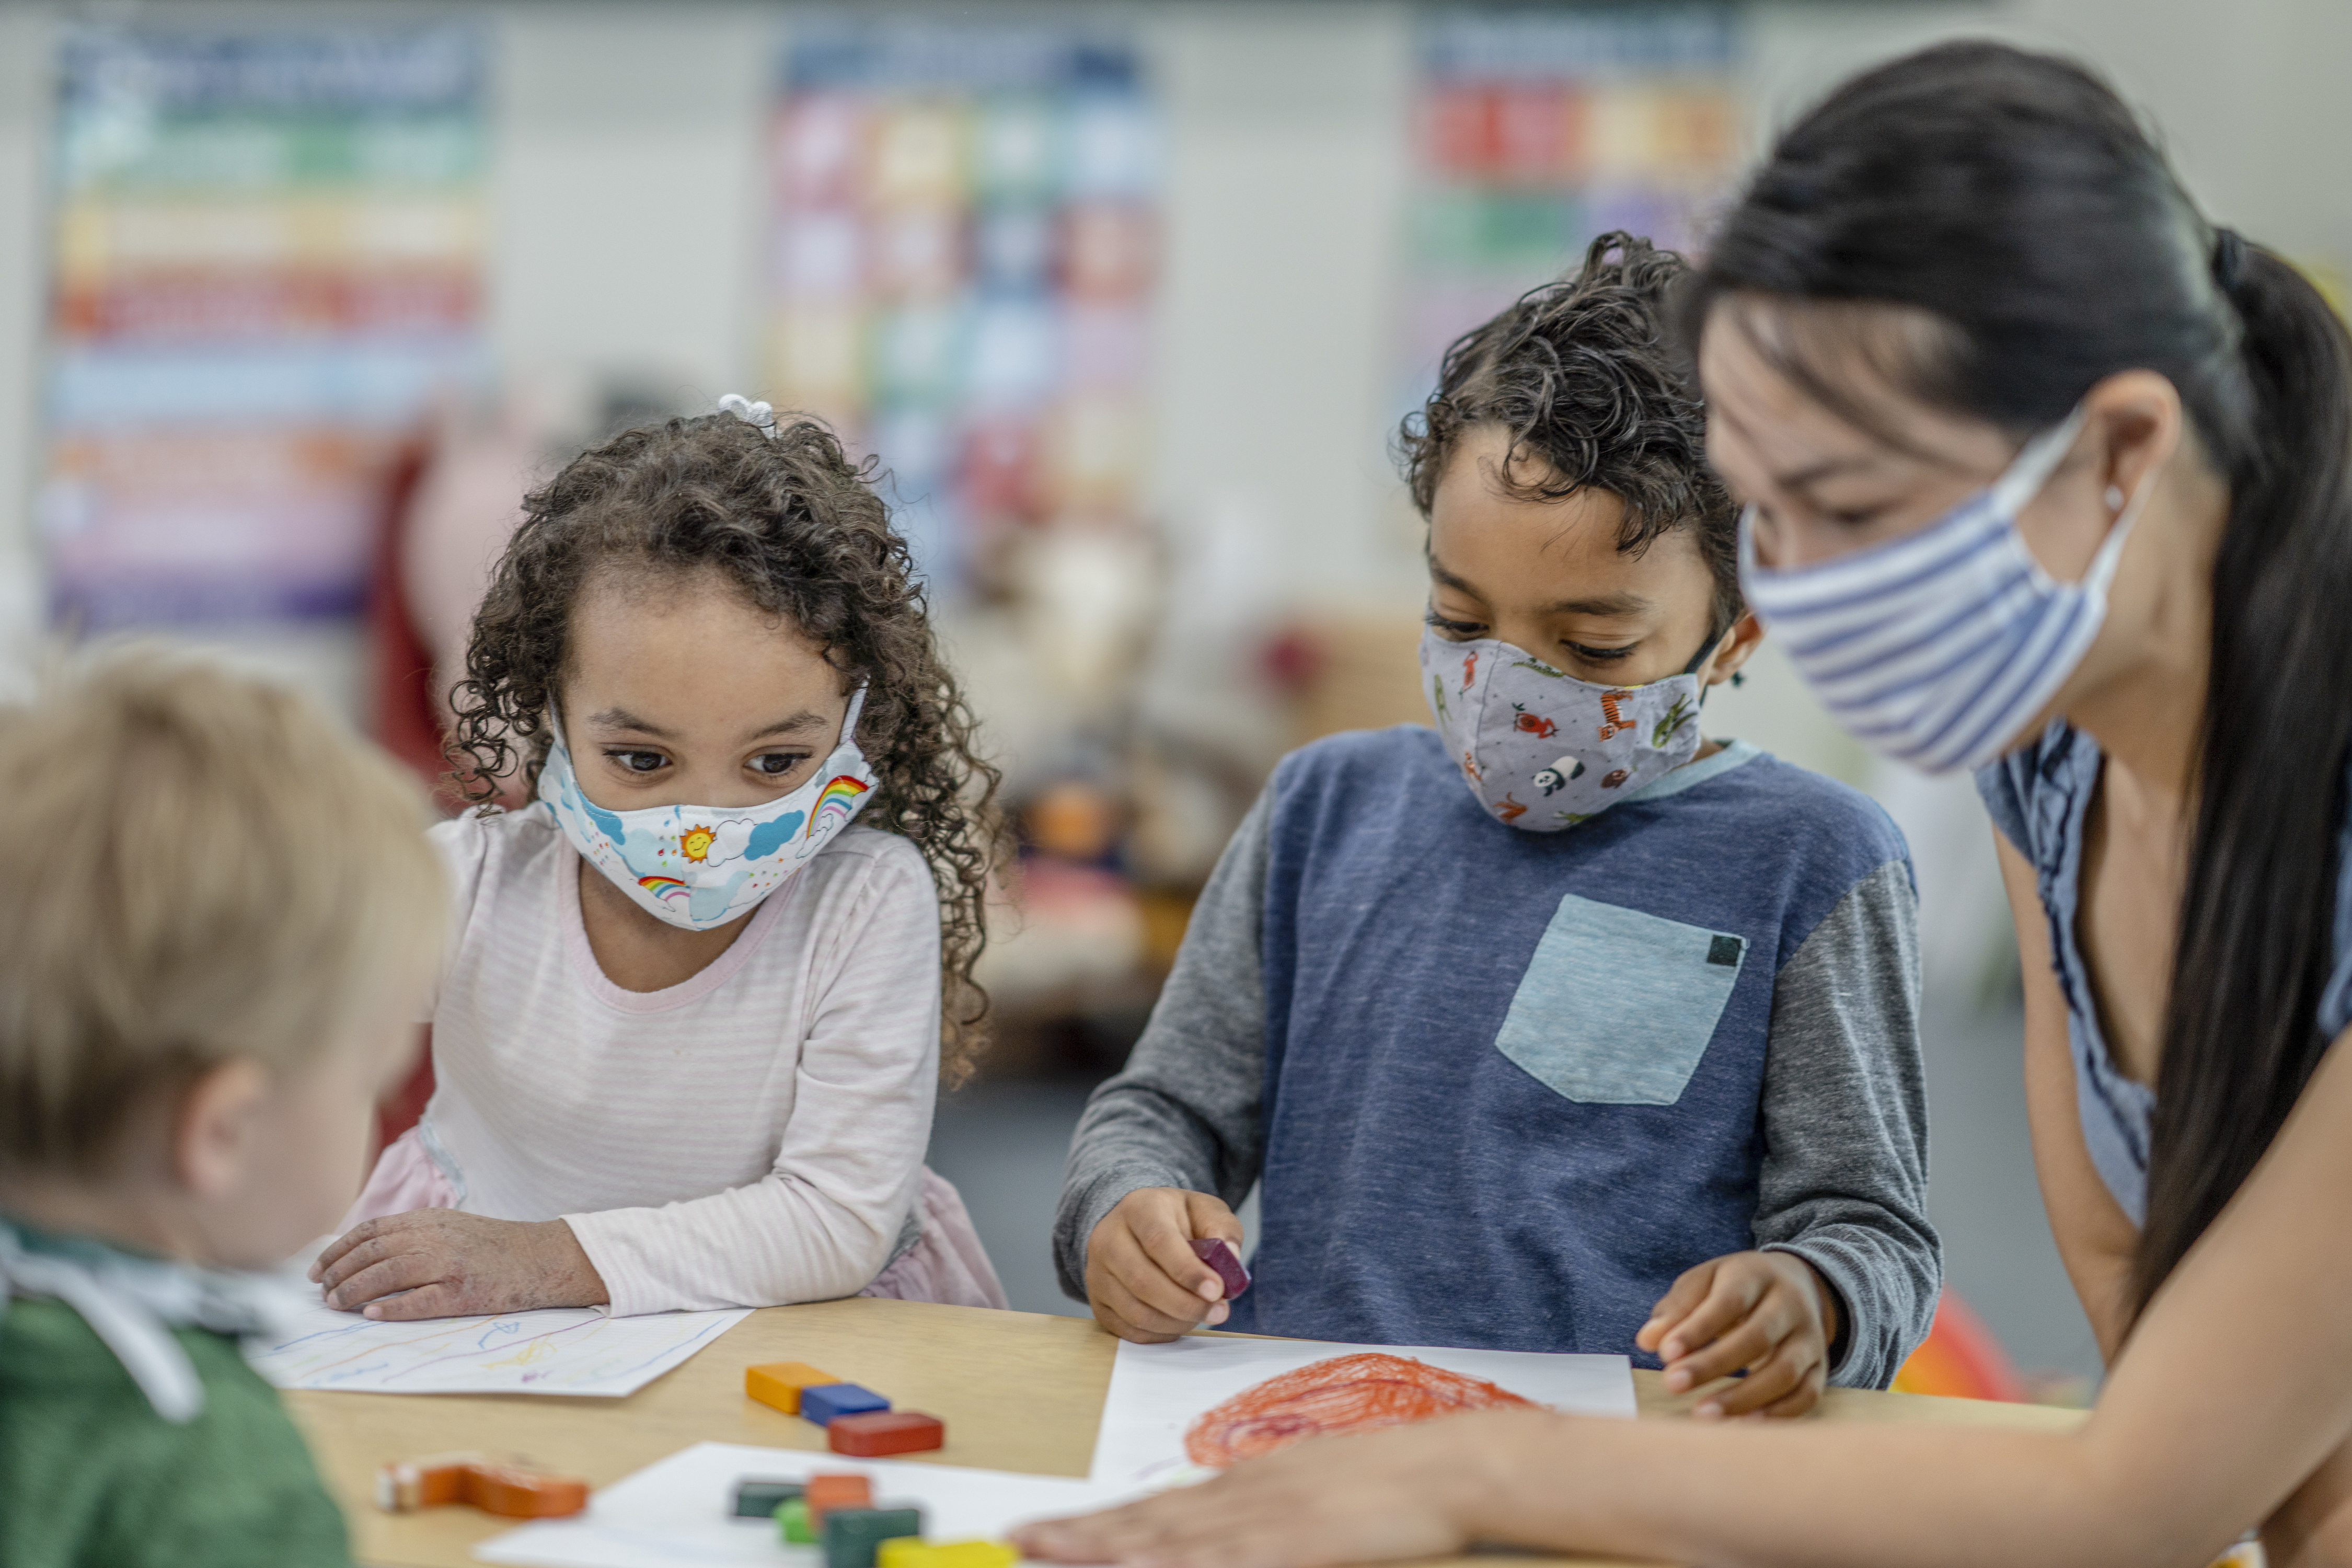 Multi-ethnic group of children colouring at a table while wearing protective face masks to avoid the transfer of germs.